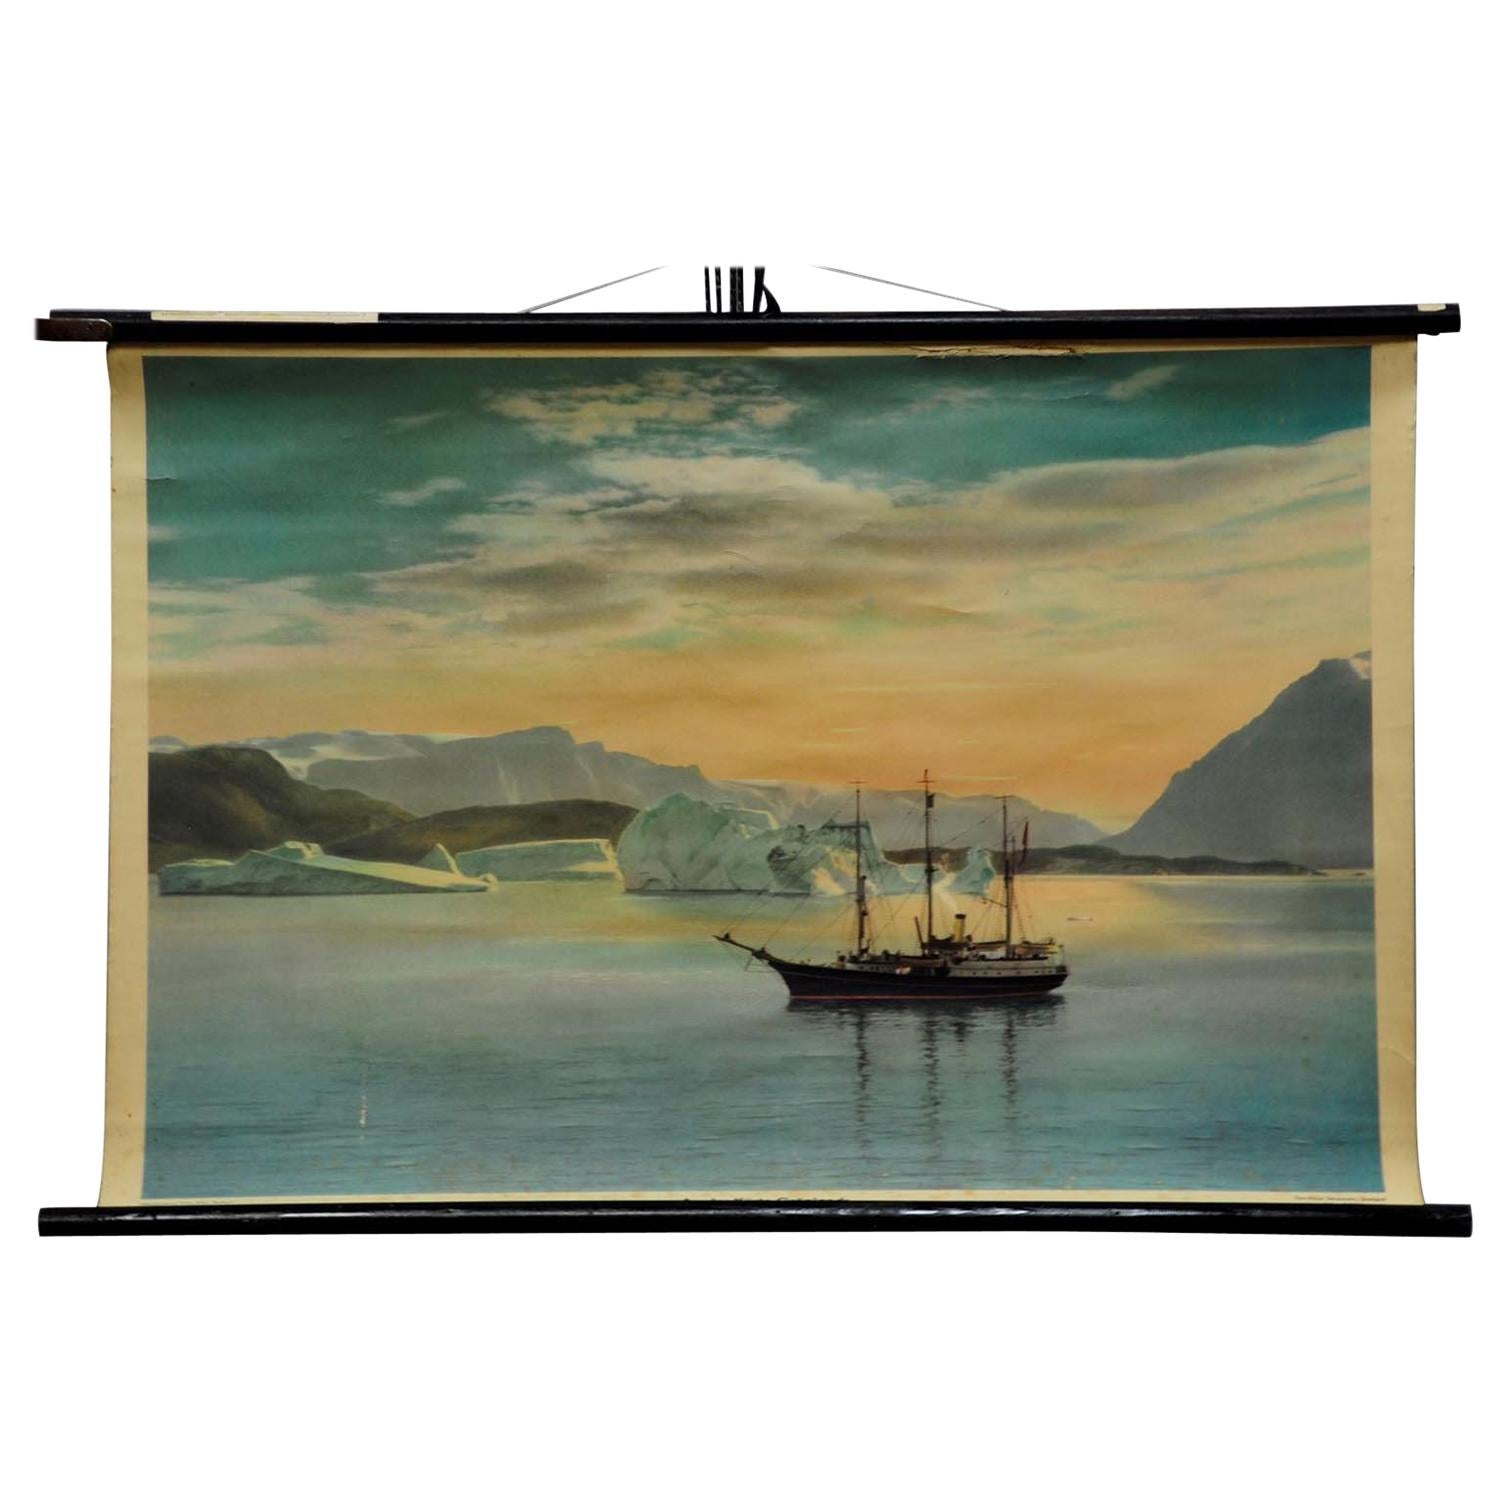 Vintage Mural Pull Down Wall Chart Landscape Sailing Ship the Coast of Greenland